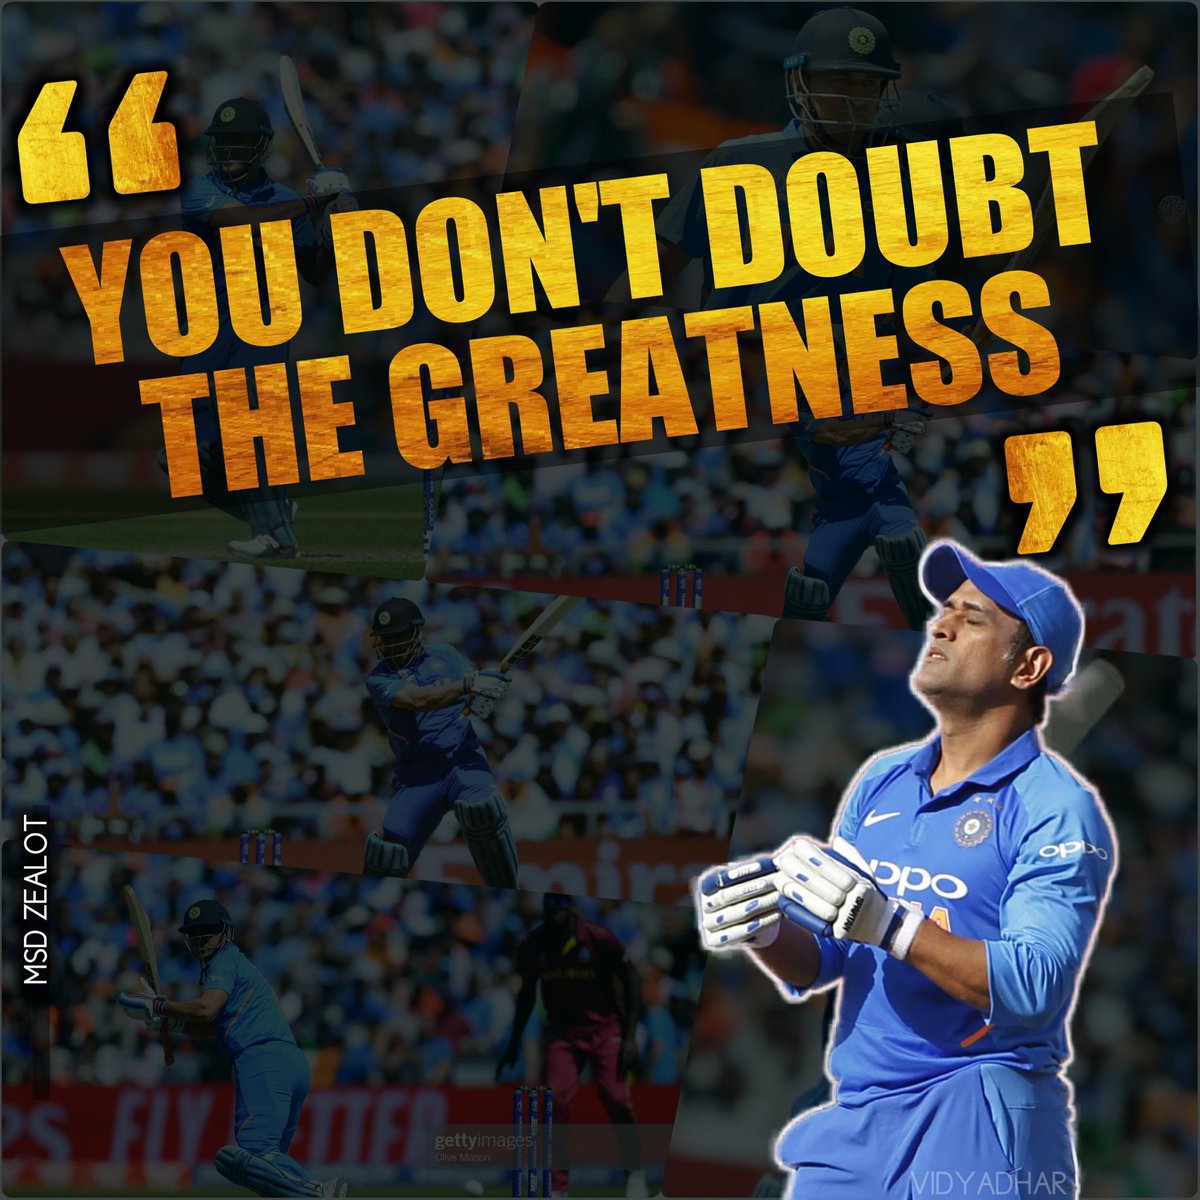 [Thread] AUS PLAYERS ABOUT MS DHONI IN LAST 11 MONTHS (SINCE JAN, 2019) !!Starting with WC winning Captain Micheal Clarke:When a reporter asked about MSD, He said, 'You don't doubt the Greatness' #MSDhoni  #OZonMSD